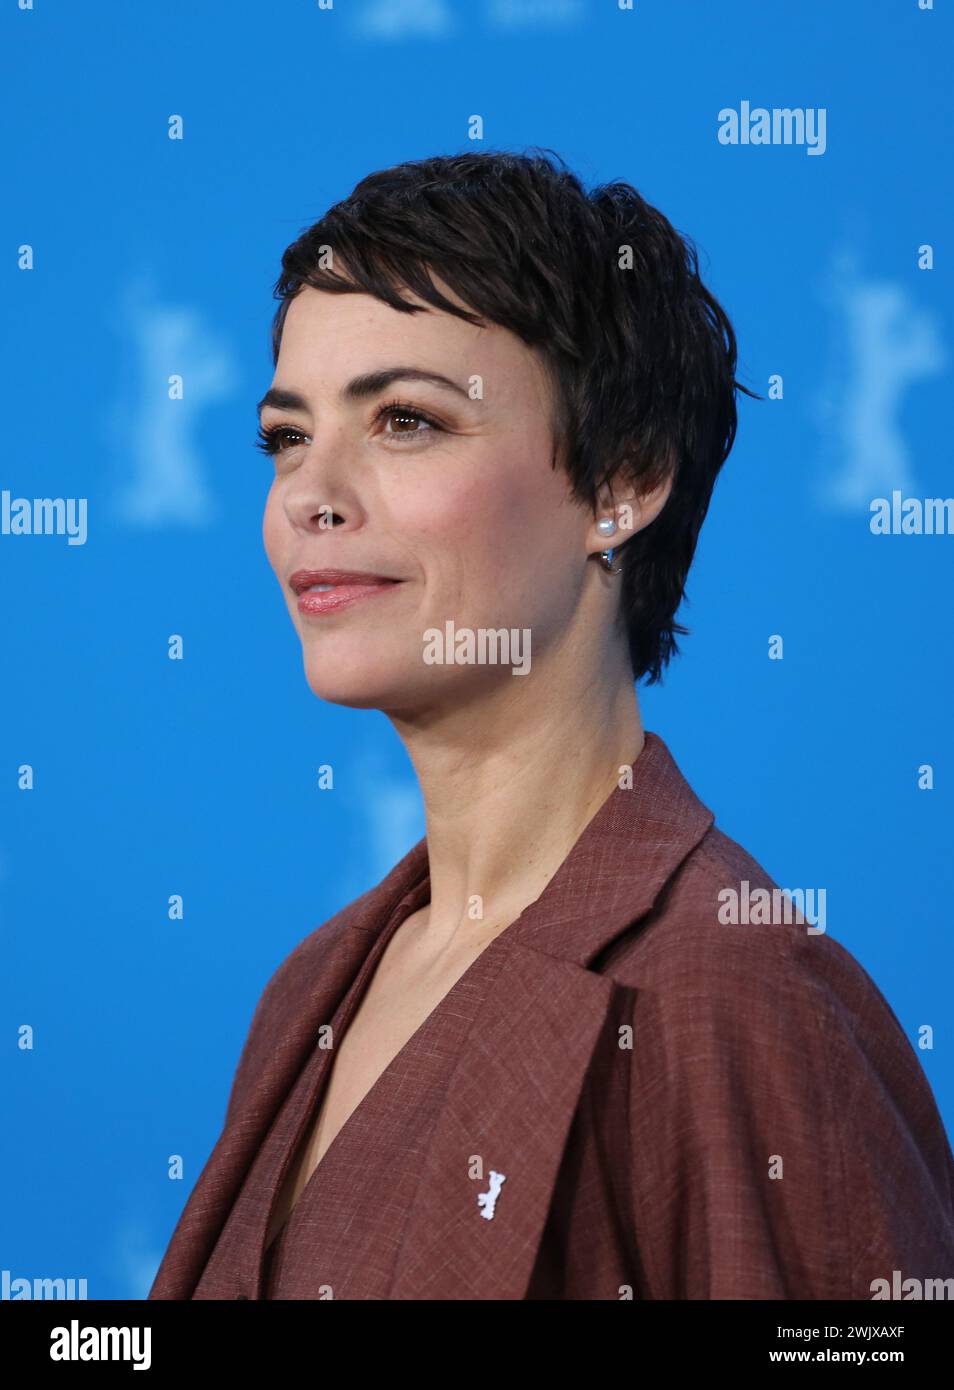 Berlin, Germany, 17th February 2024, Actor Bérénice Bejo at the photo call for the film Another End at the 74th Berlinale International Film Festival. Photo Credit: Doreen Kennedy / Alamy Live News. Stock Photo